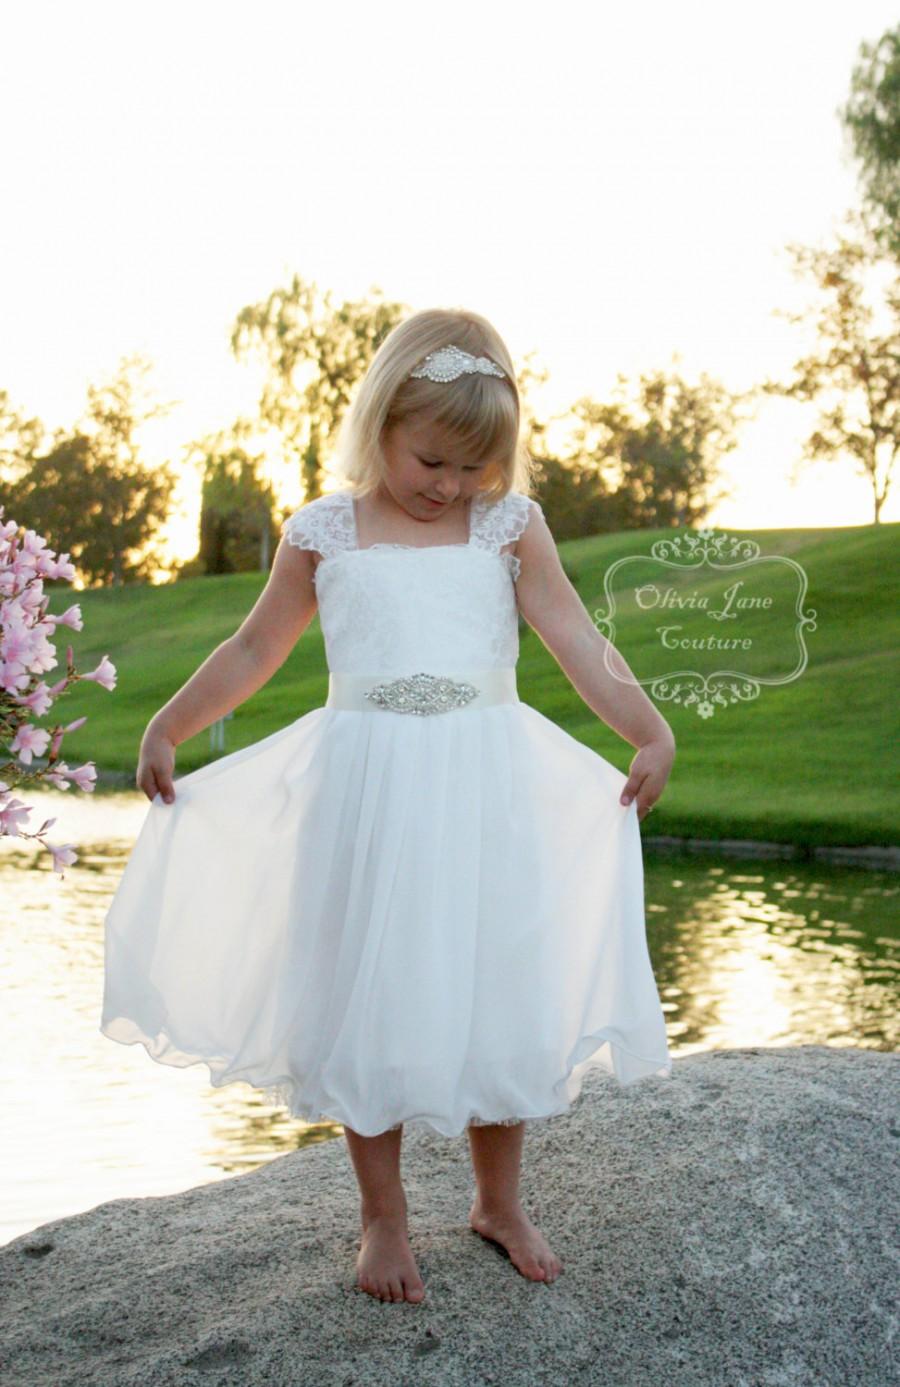 Mariage - Claire Flower Girl Dress - Ivory Lace Flower Girl Dress - Beach Wedding Flower Girl Dress - Boho Flower Girl Dress - Junior Bridesmaid Dress